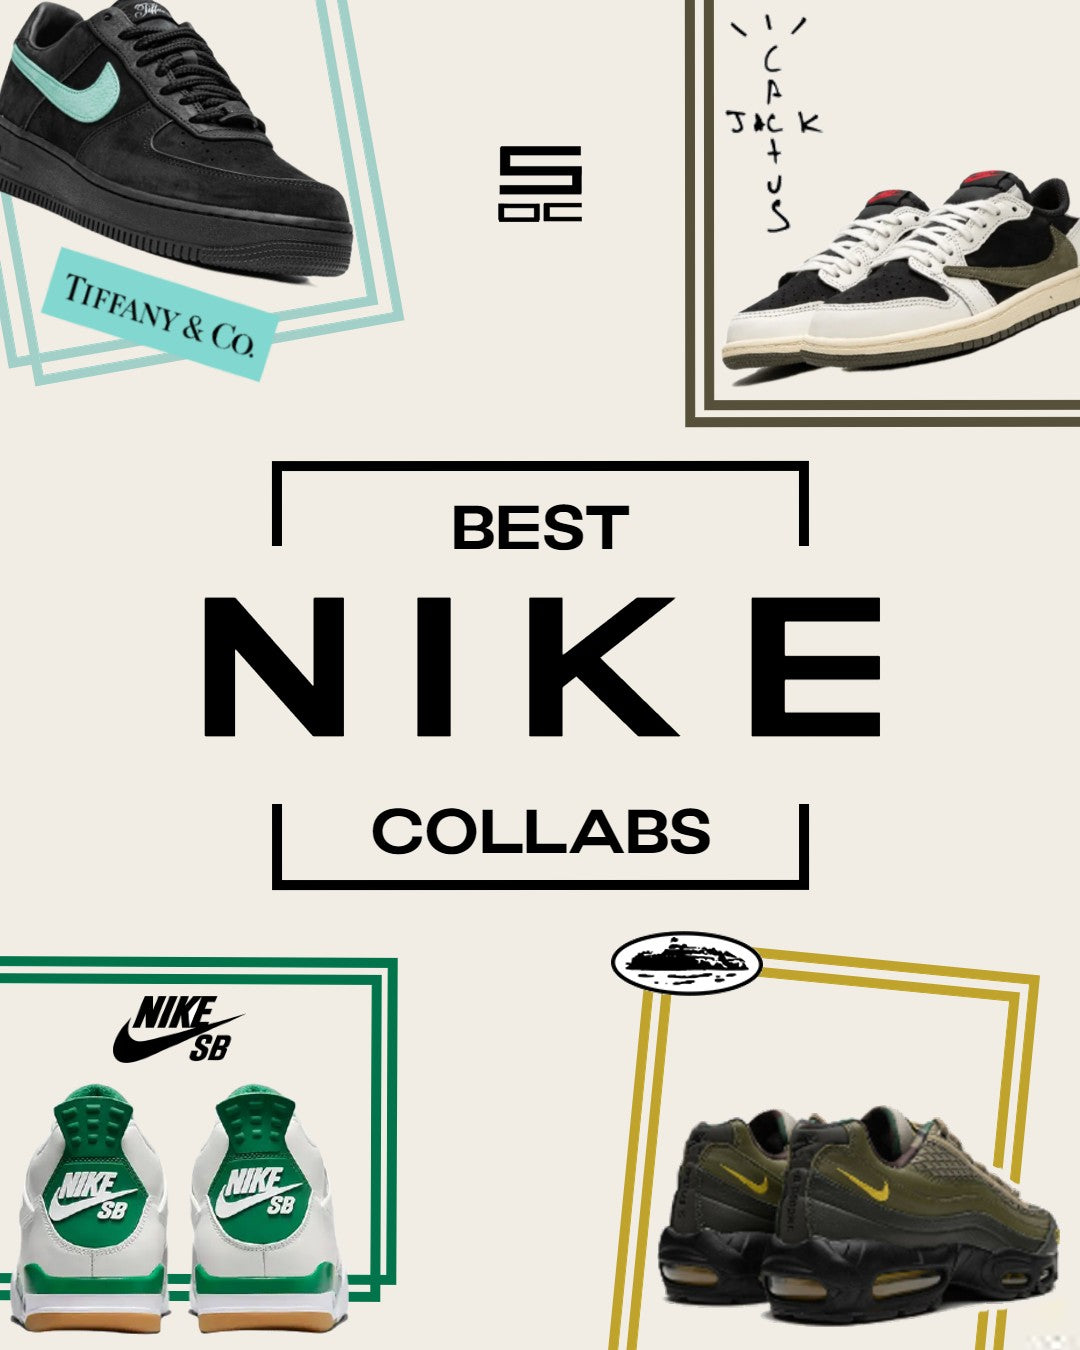 THE BEST NIKE SNEAKER COLLABS